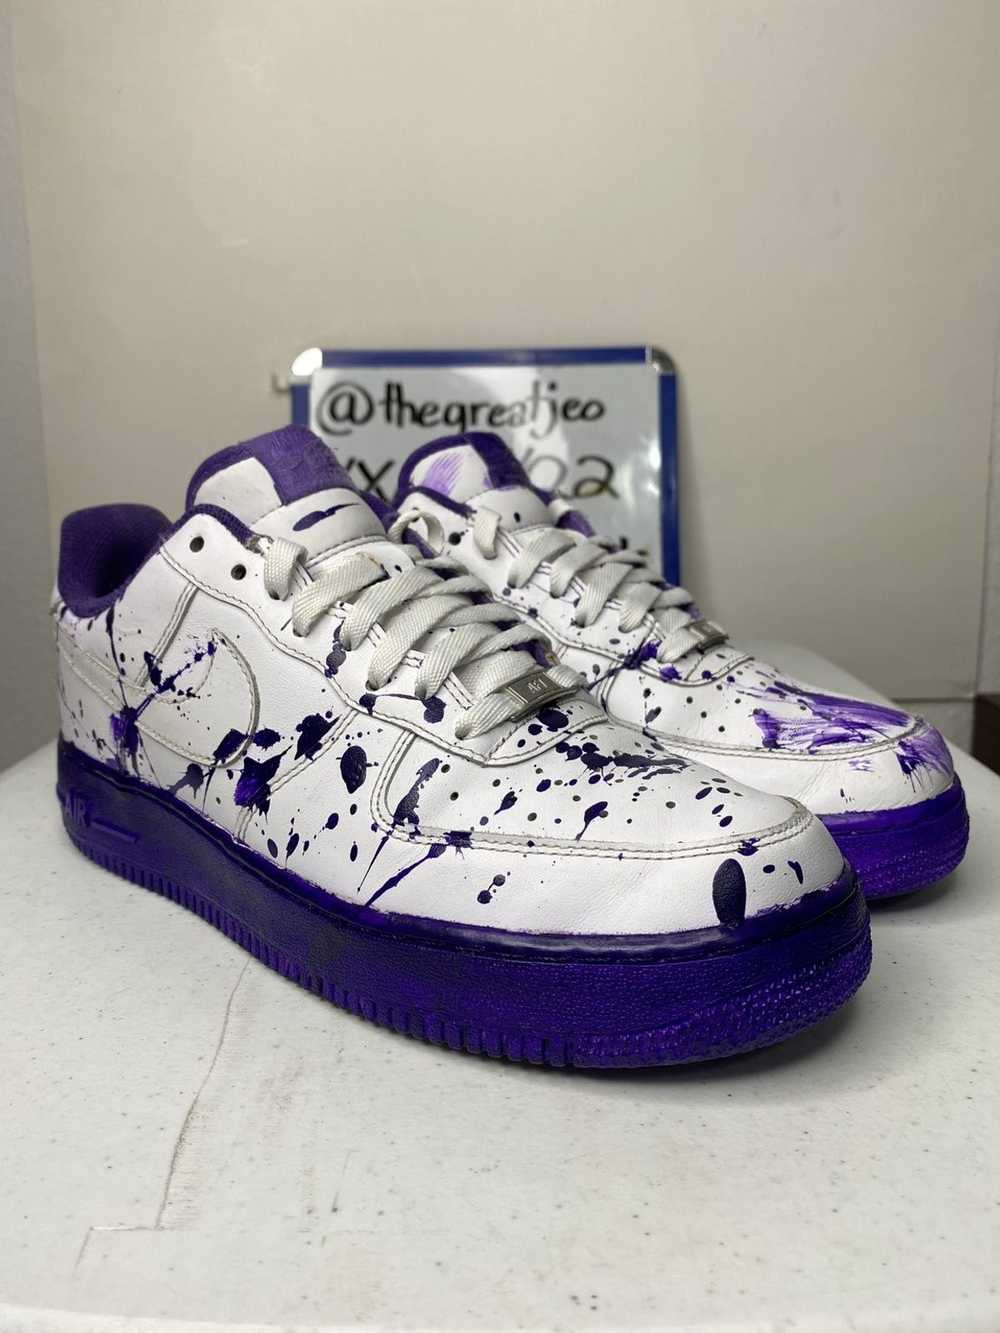 Nike Air Force 1 07 White Customs - image 1